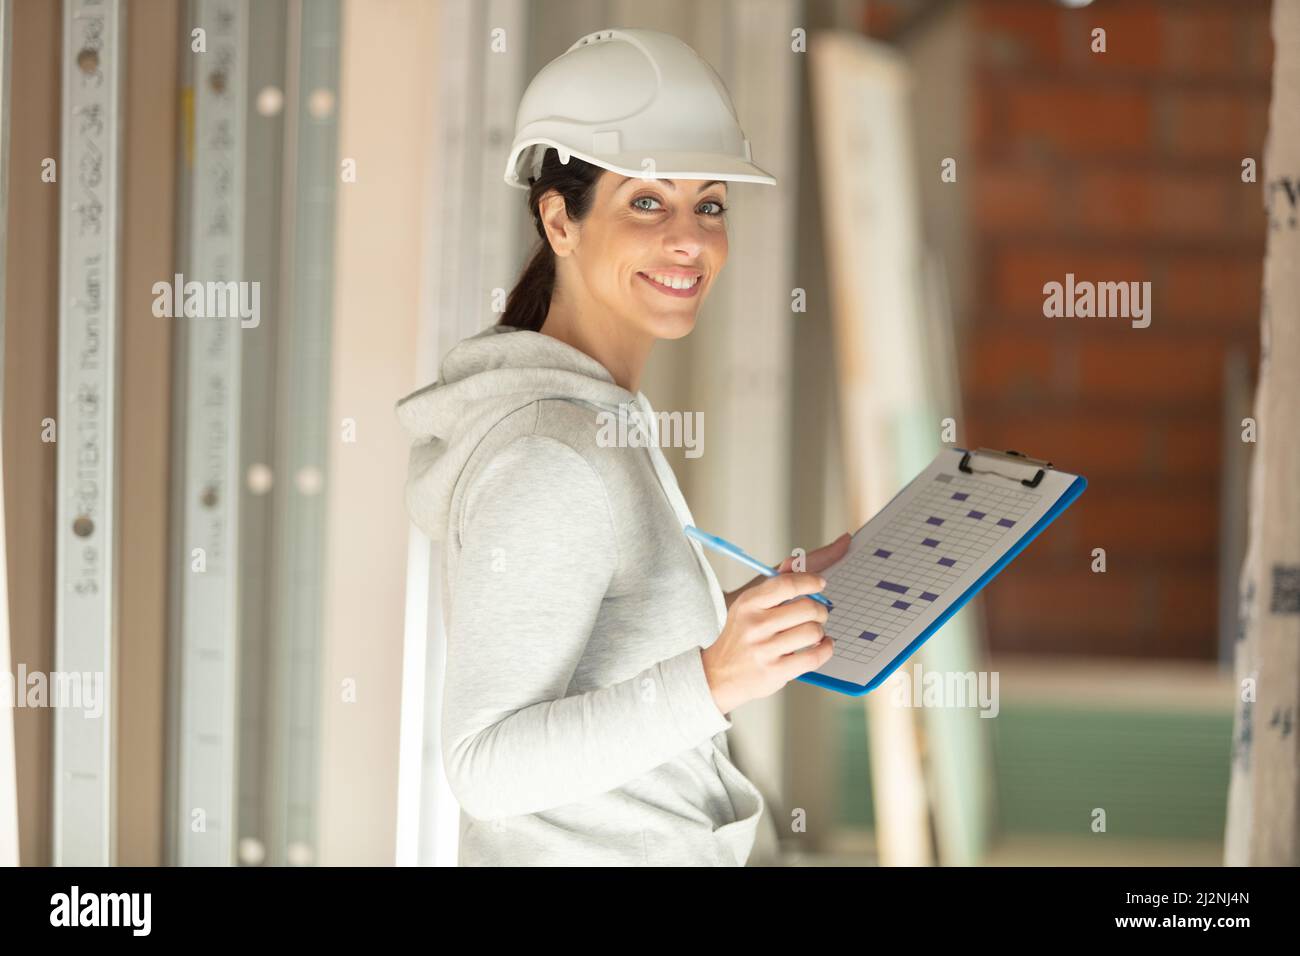 female building inspector holding a clipboard Stock Photo